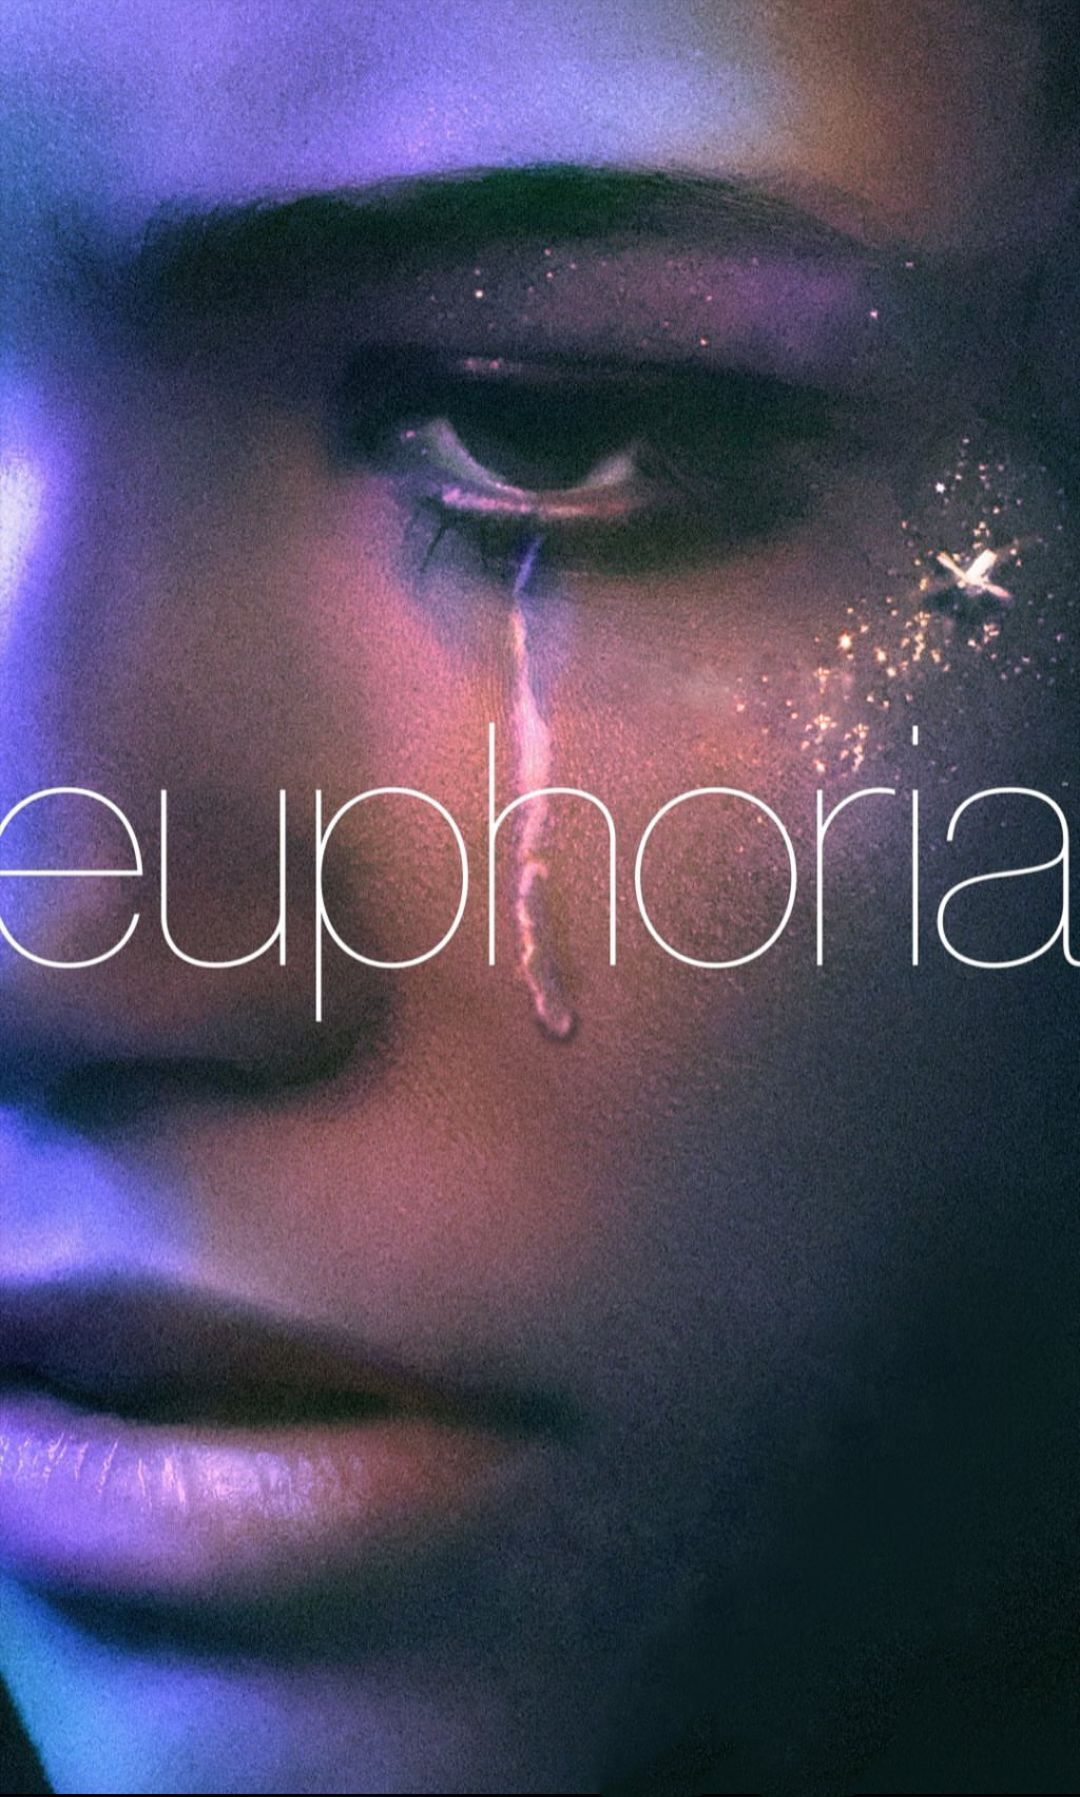 UPDATE: better format for a wallpaper. photohopped out Zendaya and HBO so it's cleaner: euphoria